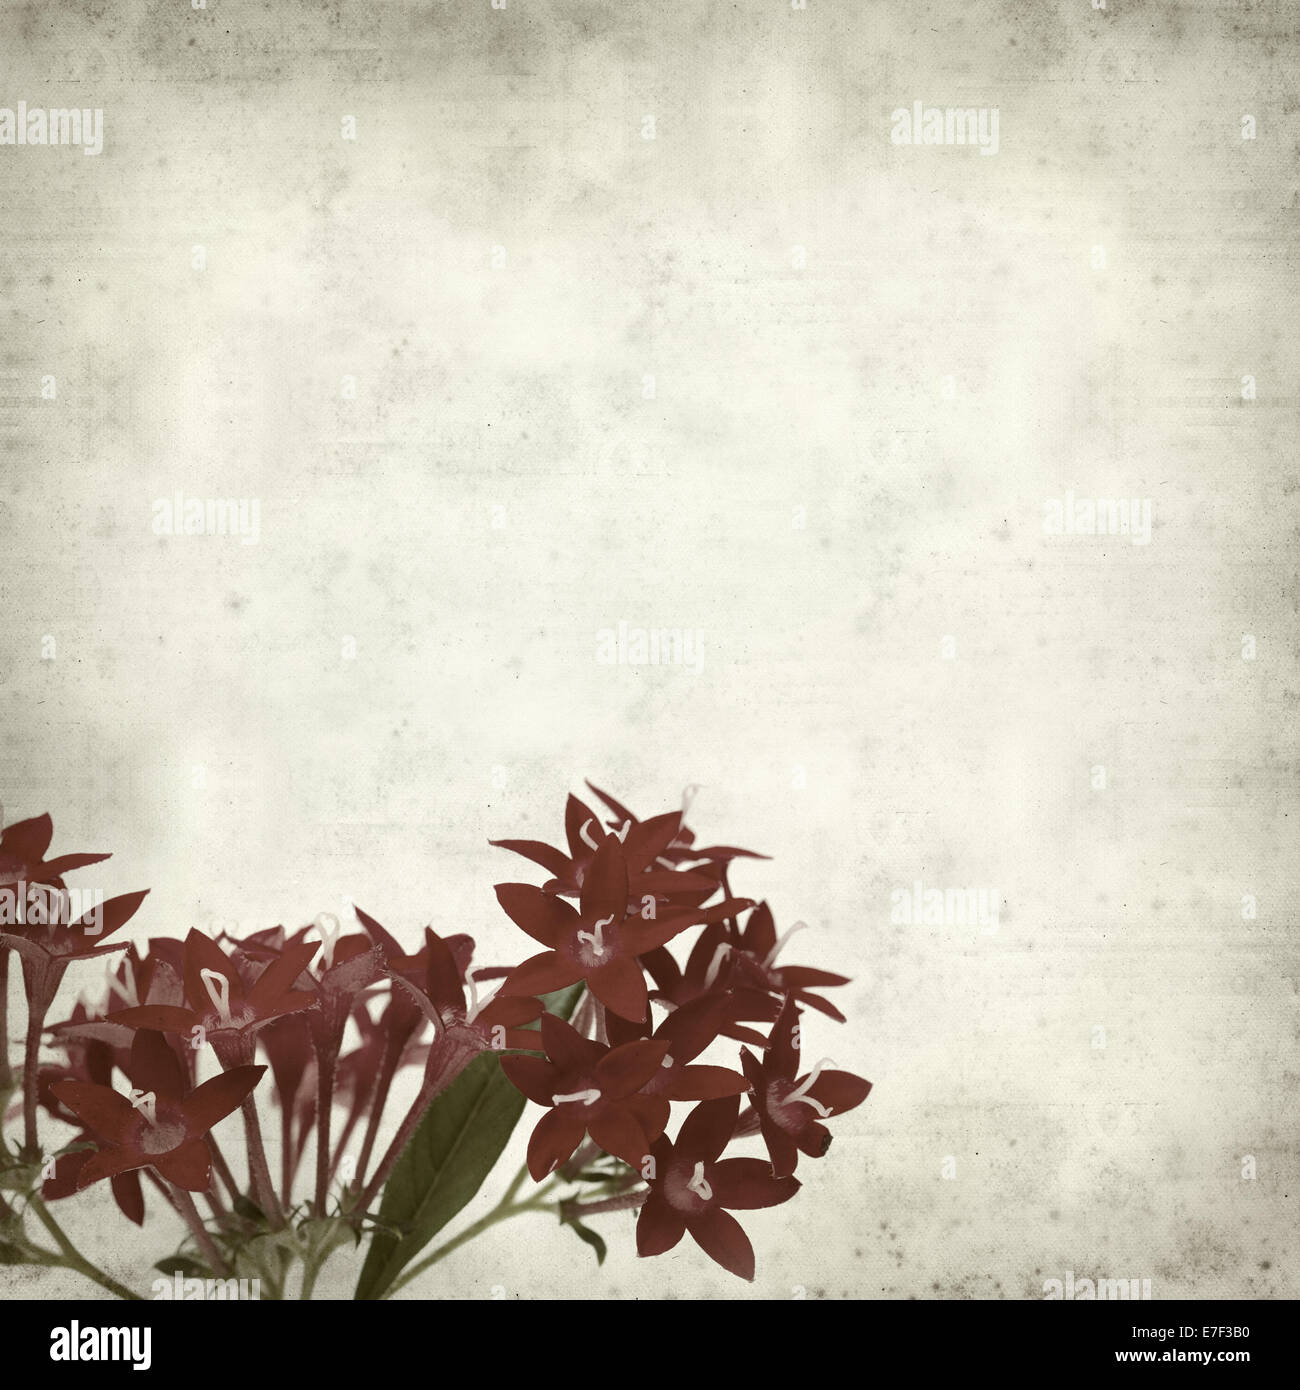 textured old paper background with pentas flowers Stock Photo